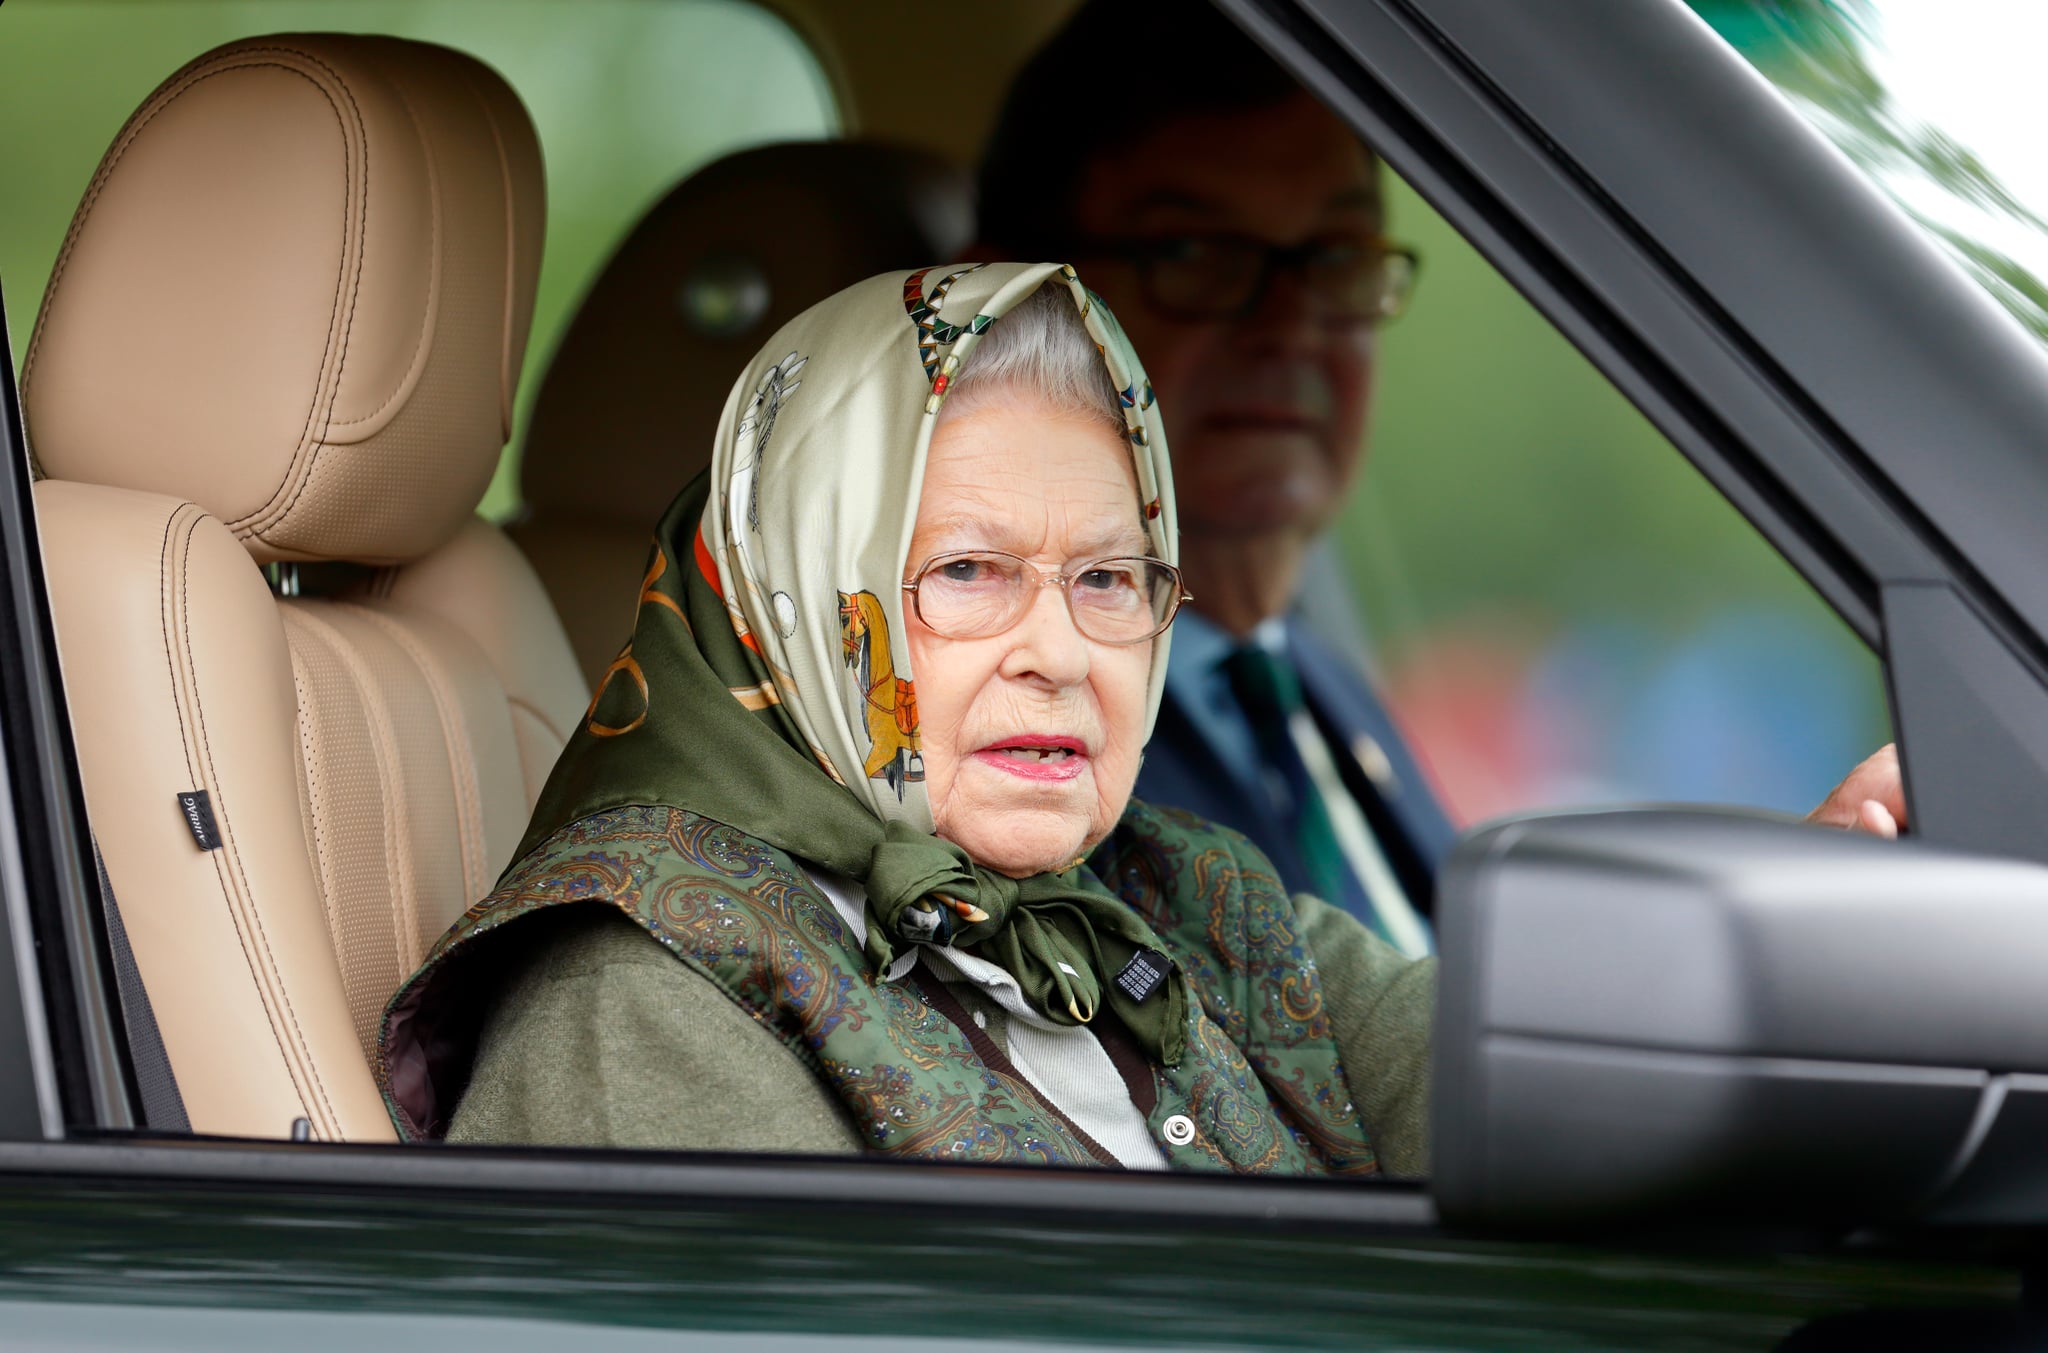 WINDSOR, UNITED KINGDOM - MAY 13: (EMBARGOED FOR PUBLICATION IN UK NEWSPAPERS UNTIL 48 HOURS AFTER CREATE DATE AND TIME) Queen Elizabeth II drives her Range Rover car as she attends day 4 of the Royal Windsor Horse Show in Home Park on May 13, 2017 in Windsor, England. (Photo by Max Mumby/Indigo/Getty Images)